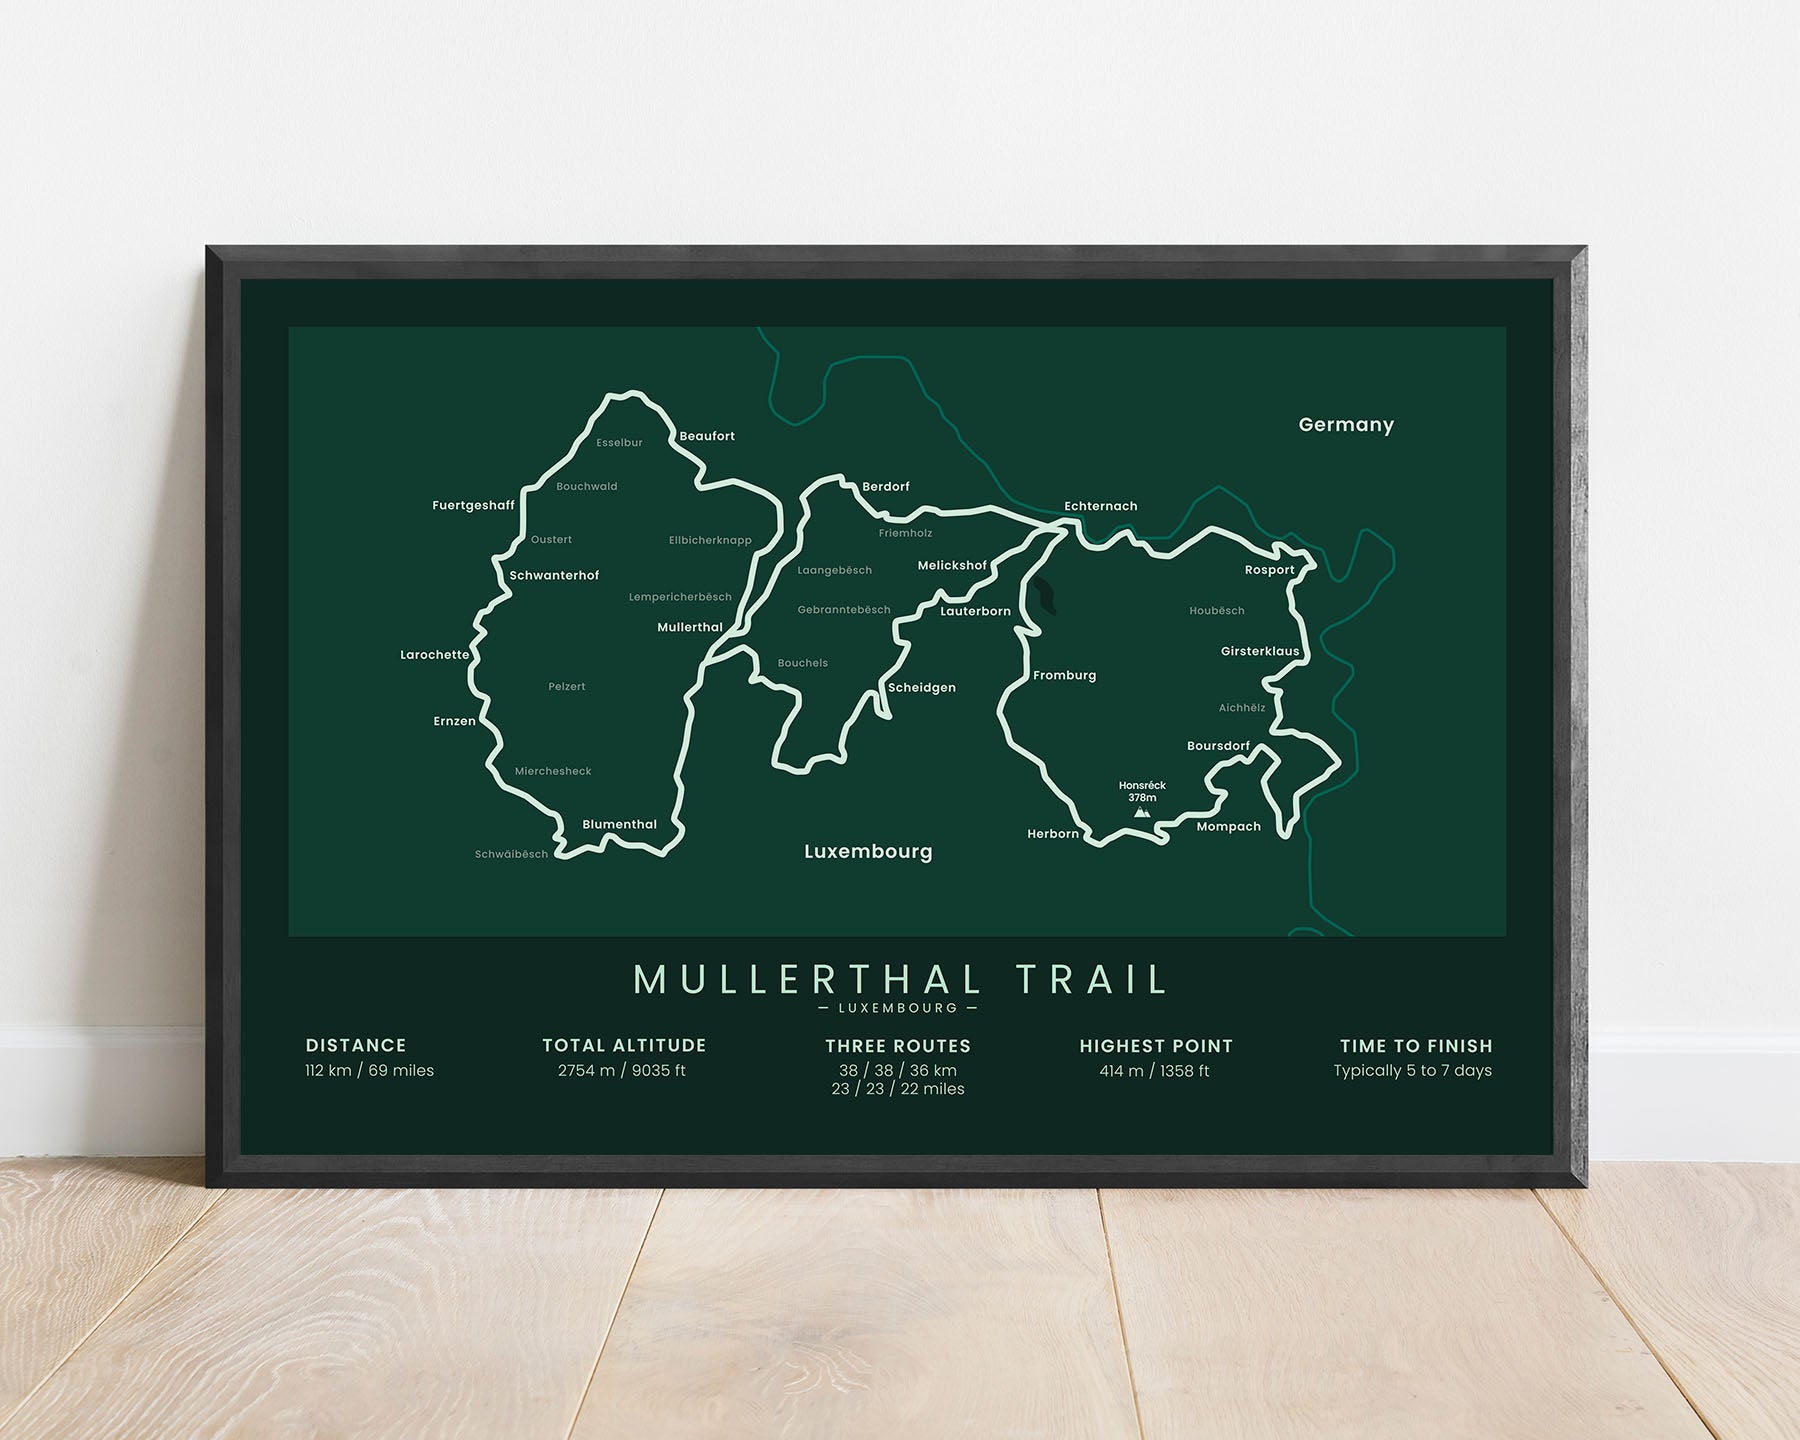 Mullerthal Trail (Europe) Trek Wall Map with Green Background